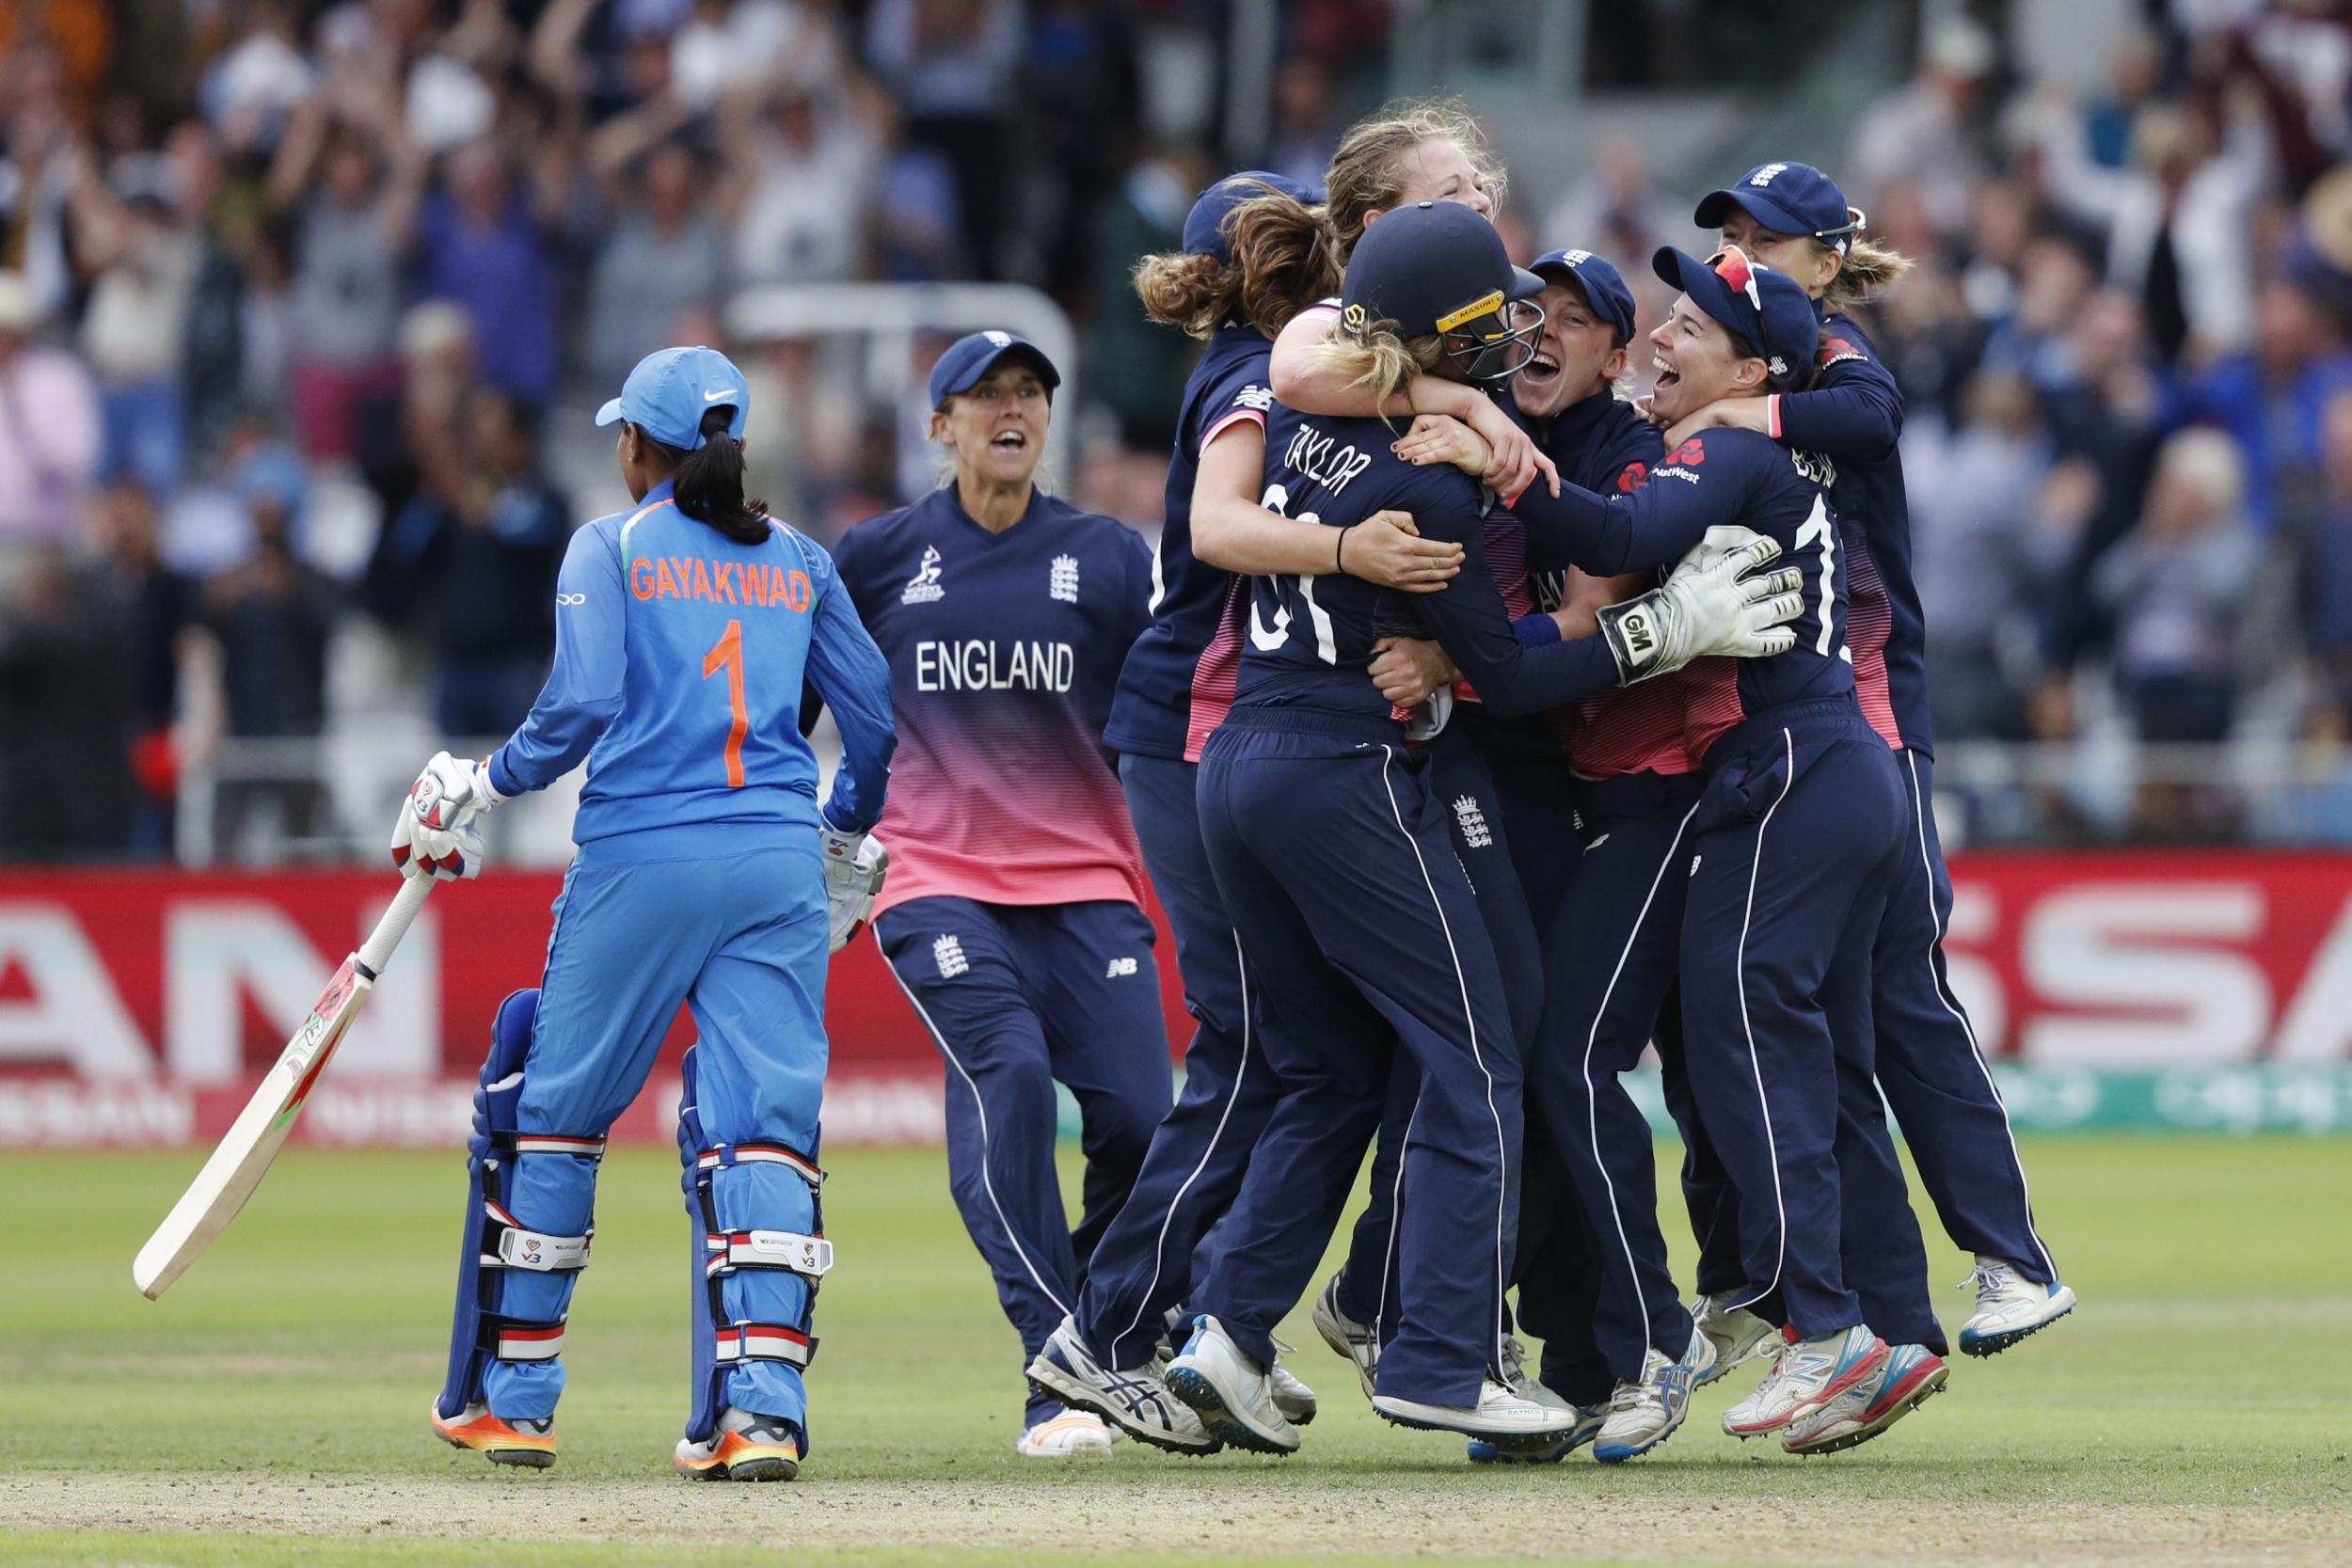 Shrubsole helped inspire England to World Cup victory last year